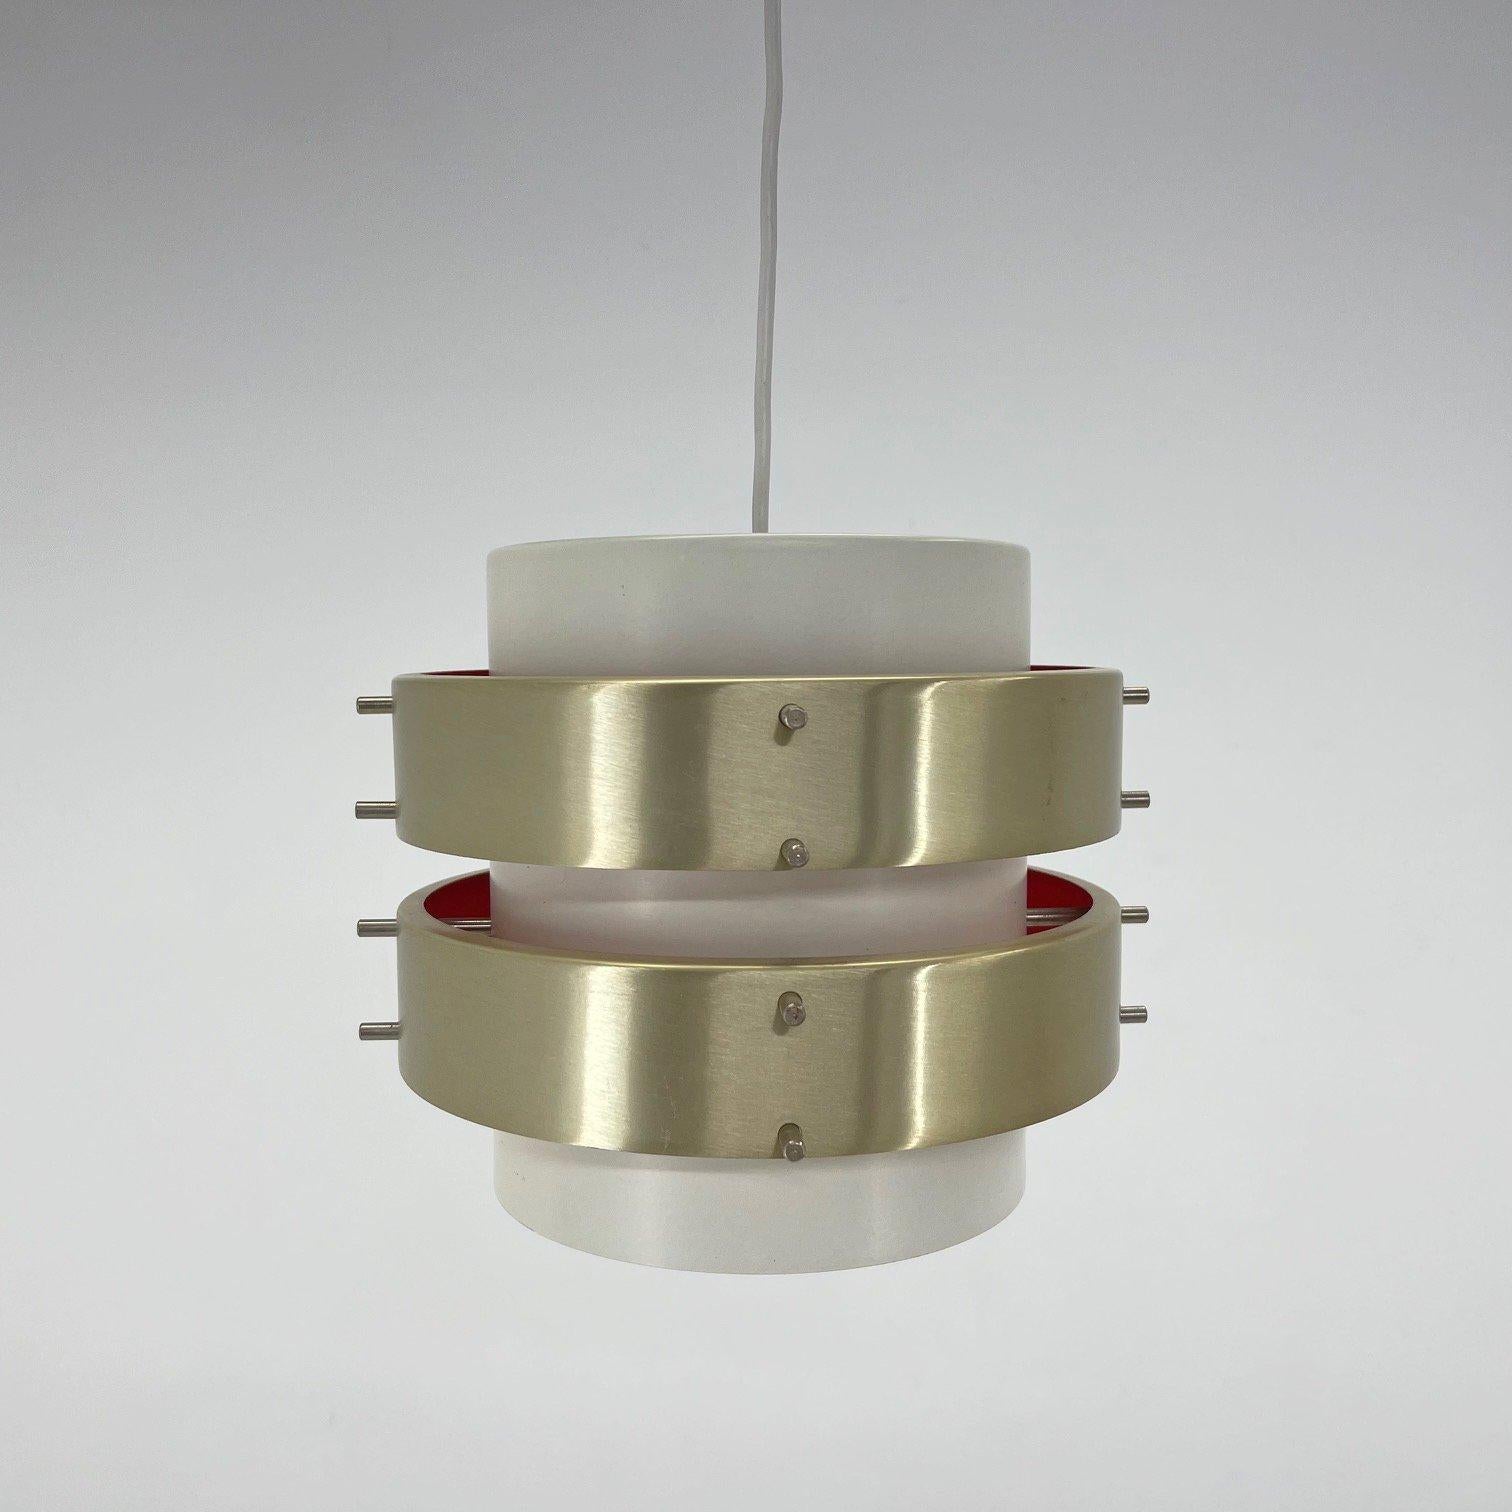 Modernist metal pendant probably from the 1960's. Made in the former GDR (East Germany). The shade is made of two interconnected metal hoops, which are painted red on the inside and reflect the colour when the light is on. The pendant is reminiscent